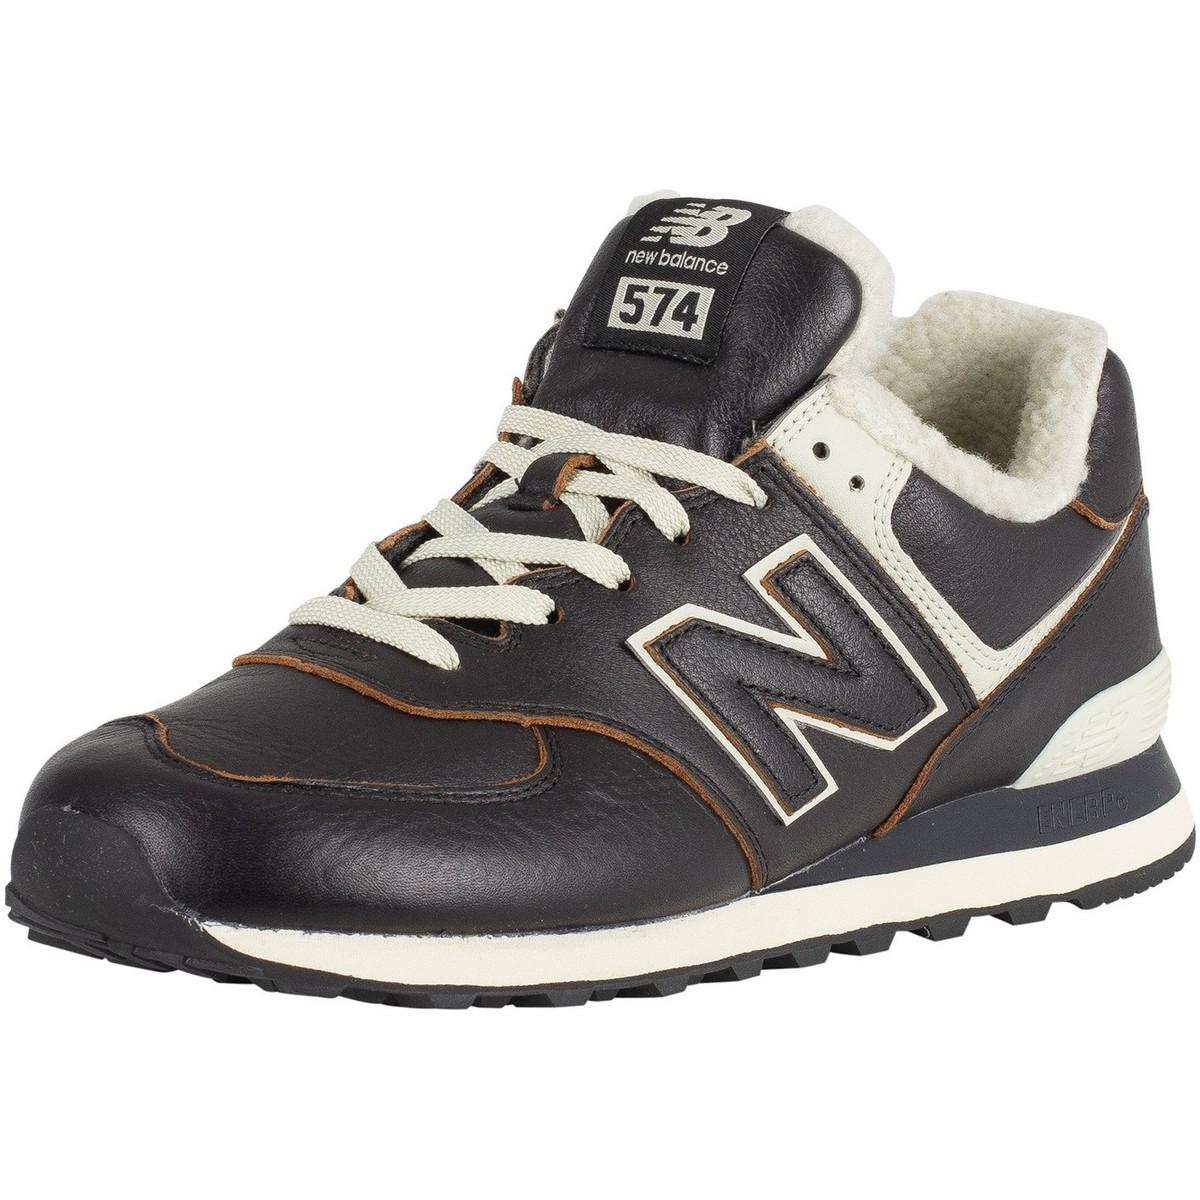 new balance men's 574 leather trainers